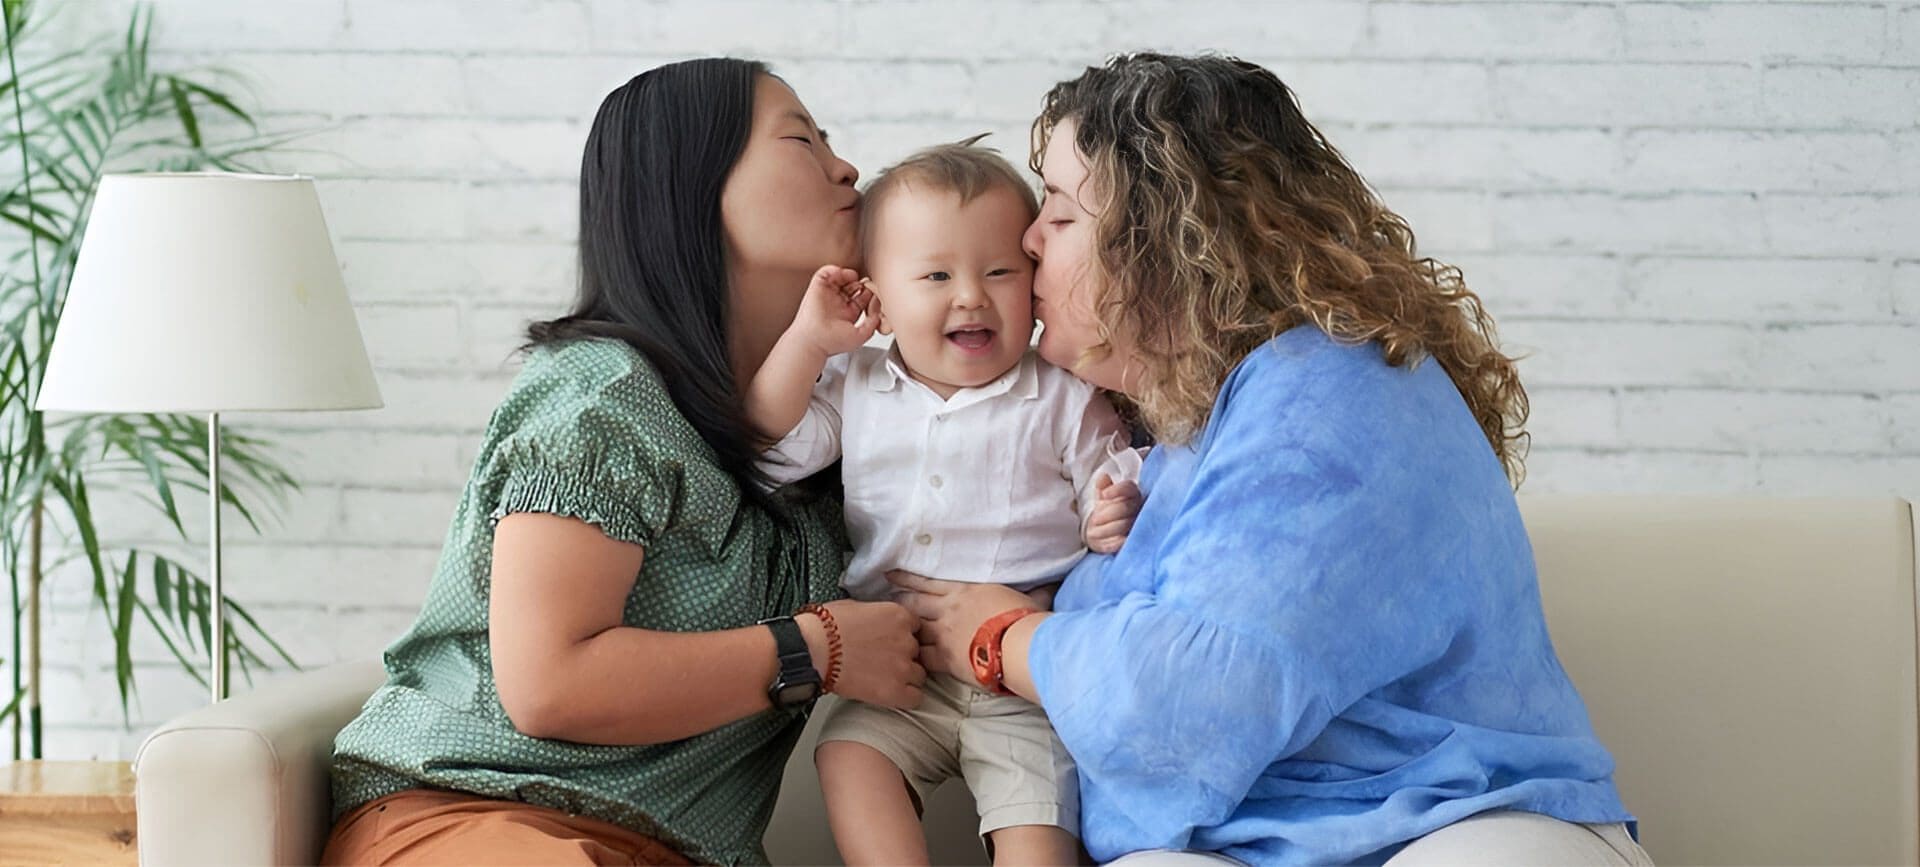 Two women kissing a baby boy on the cheek.